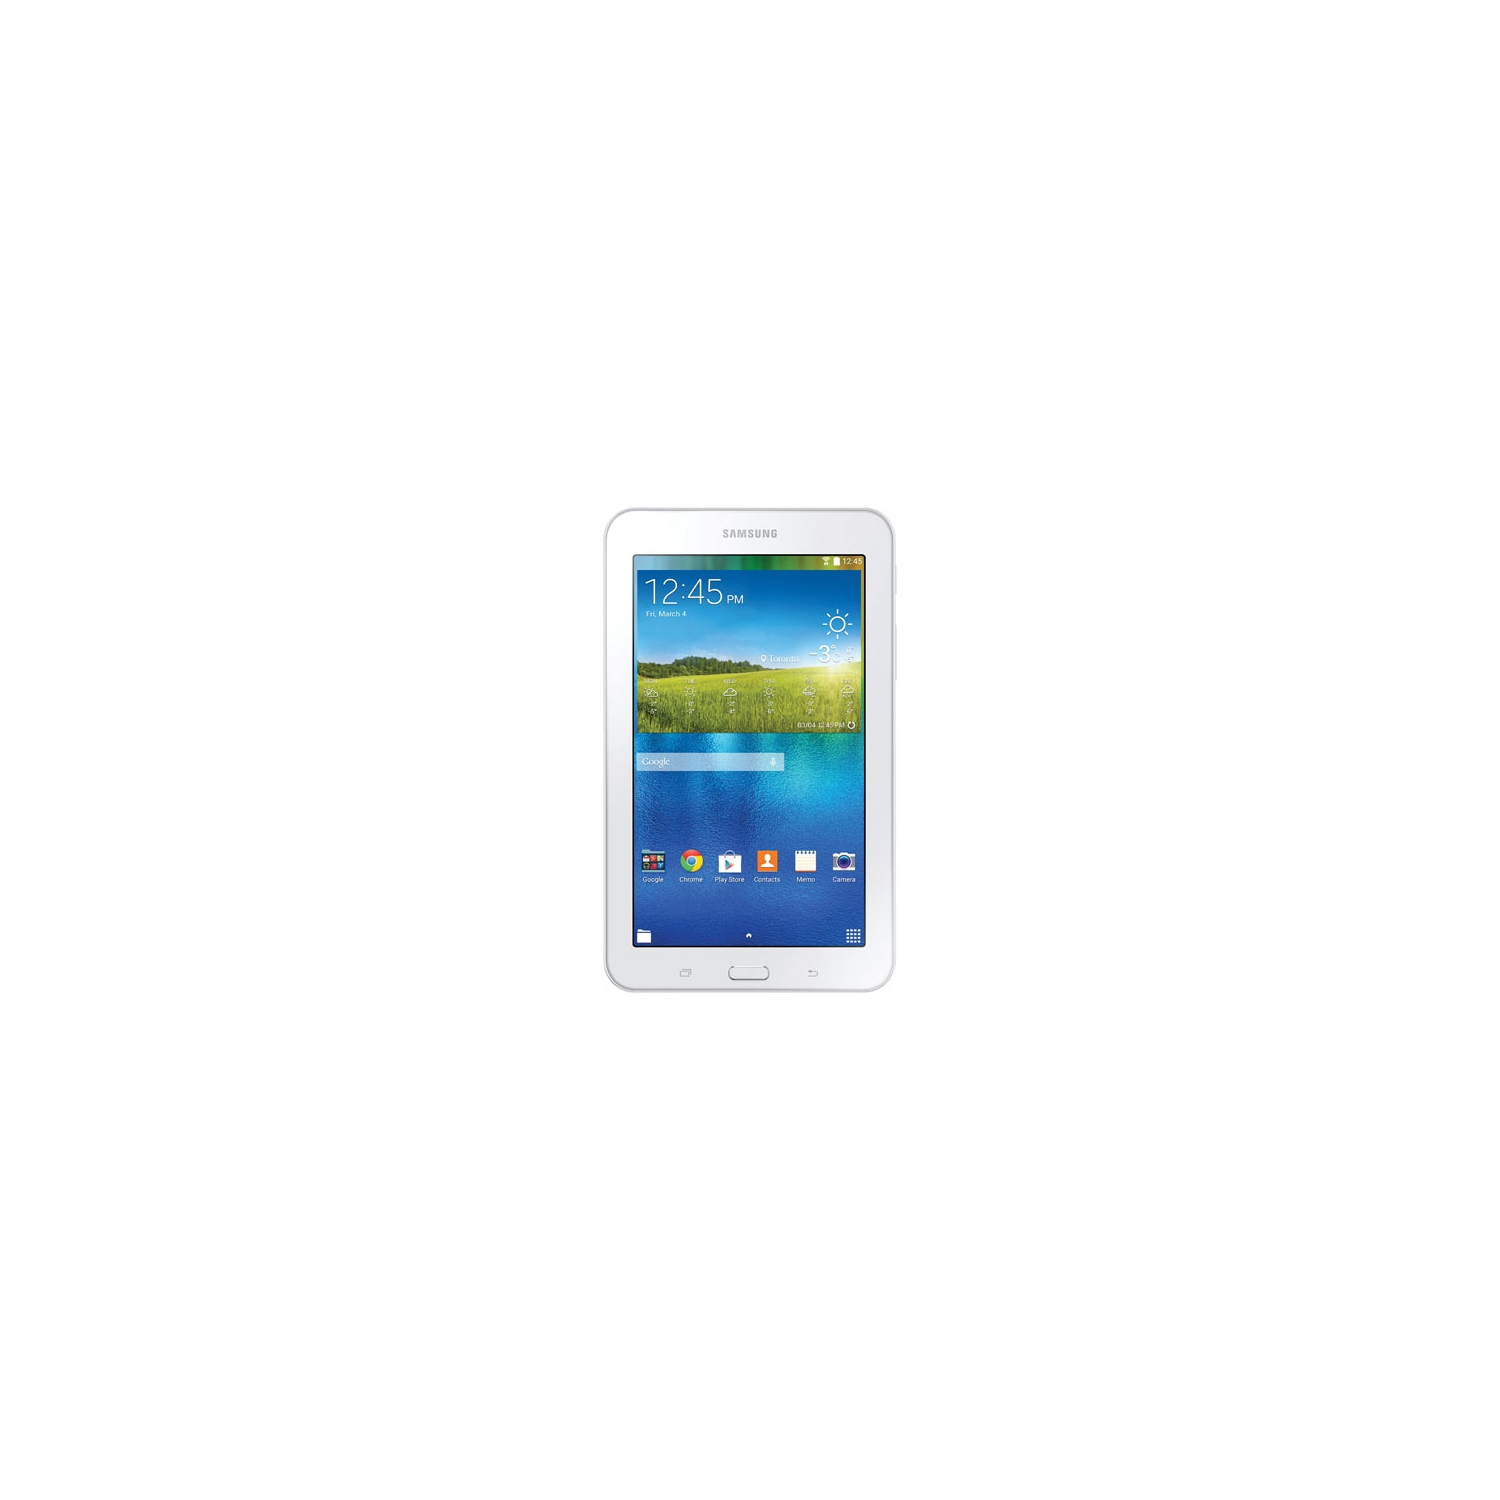 Refurbished (Good) - Samsung Galaxy Tab 7" E Lite 8GB Android 4.4 Tablet with Spreadtrum T-Shark Quad-Core Processor-White